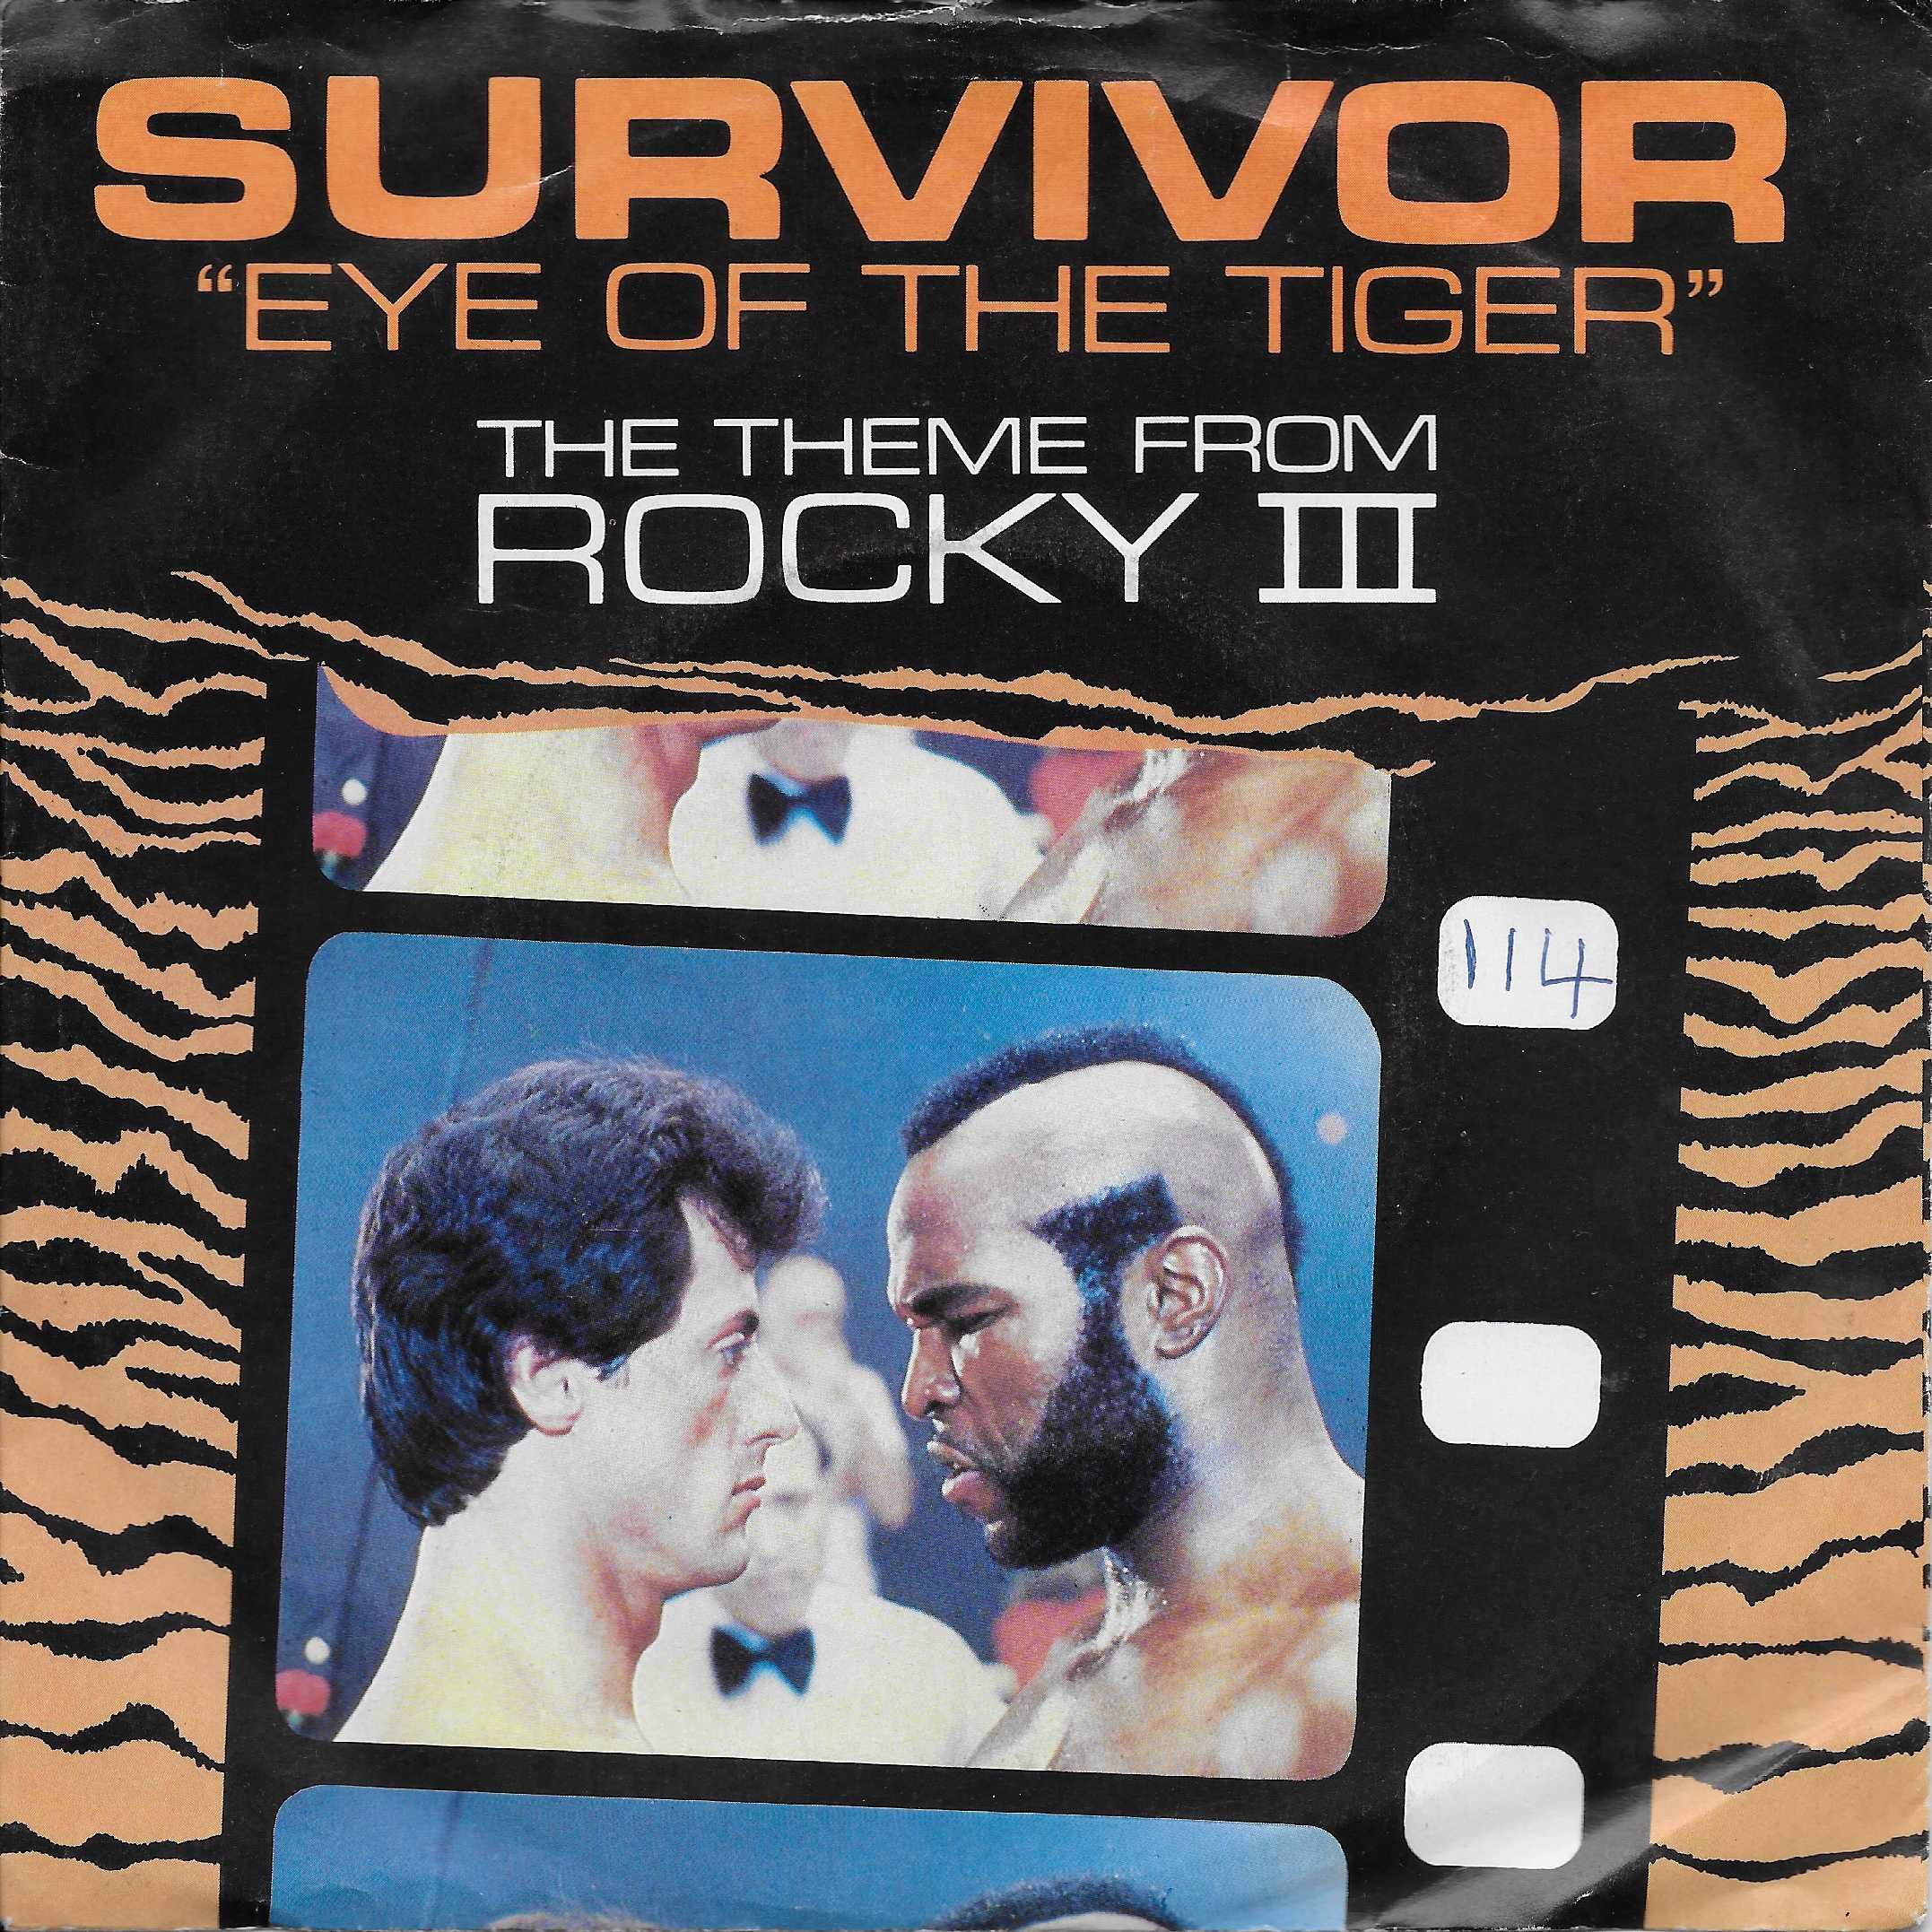 Picture of SCT A 2411 Eye of the tiger (Rocky III) by artist F Sullivan / J Peterik from ITV, Channel 4 and Channel 5 library